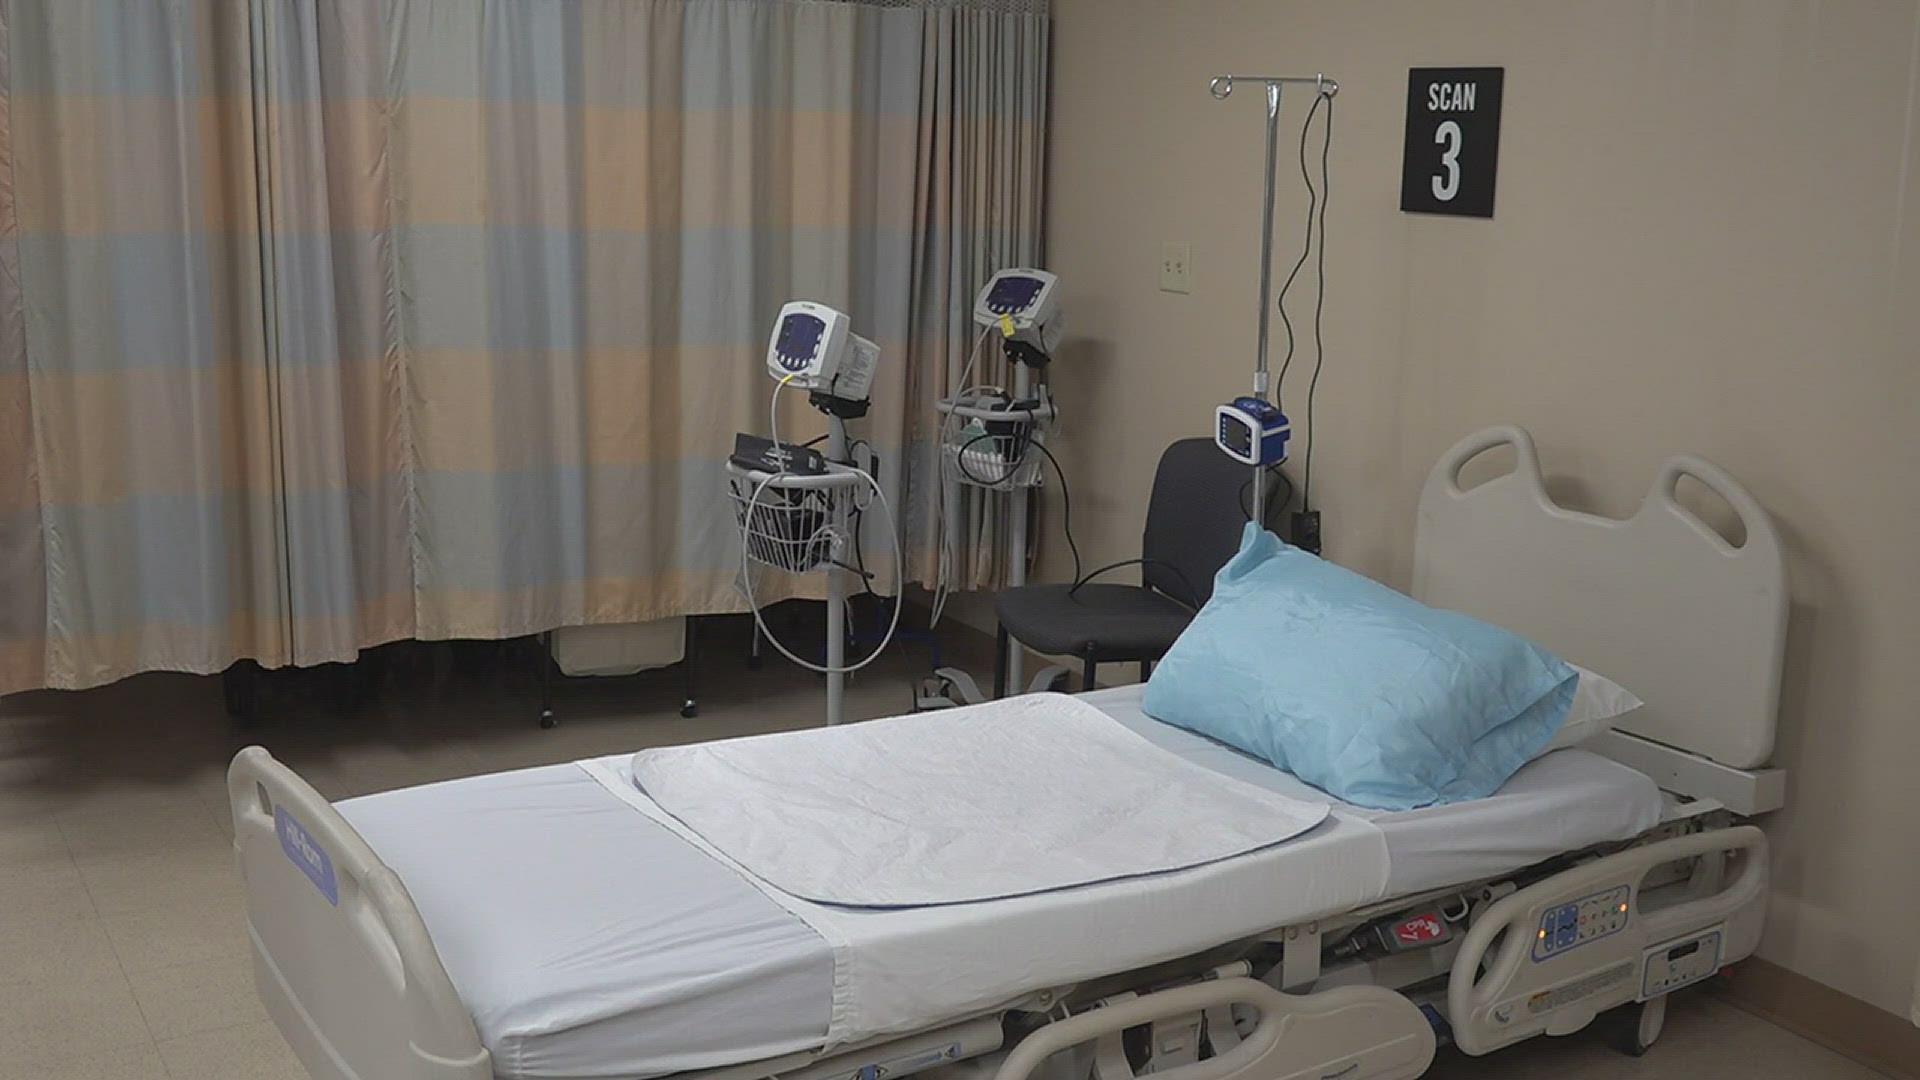 At just CHRISTUS St. Elizabeth Hospital alone, more than 120 nursing positions are open.